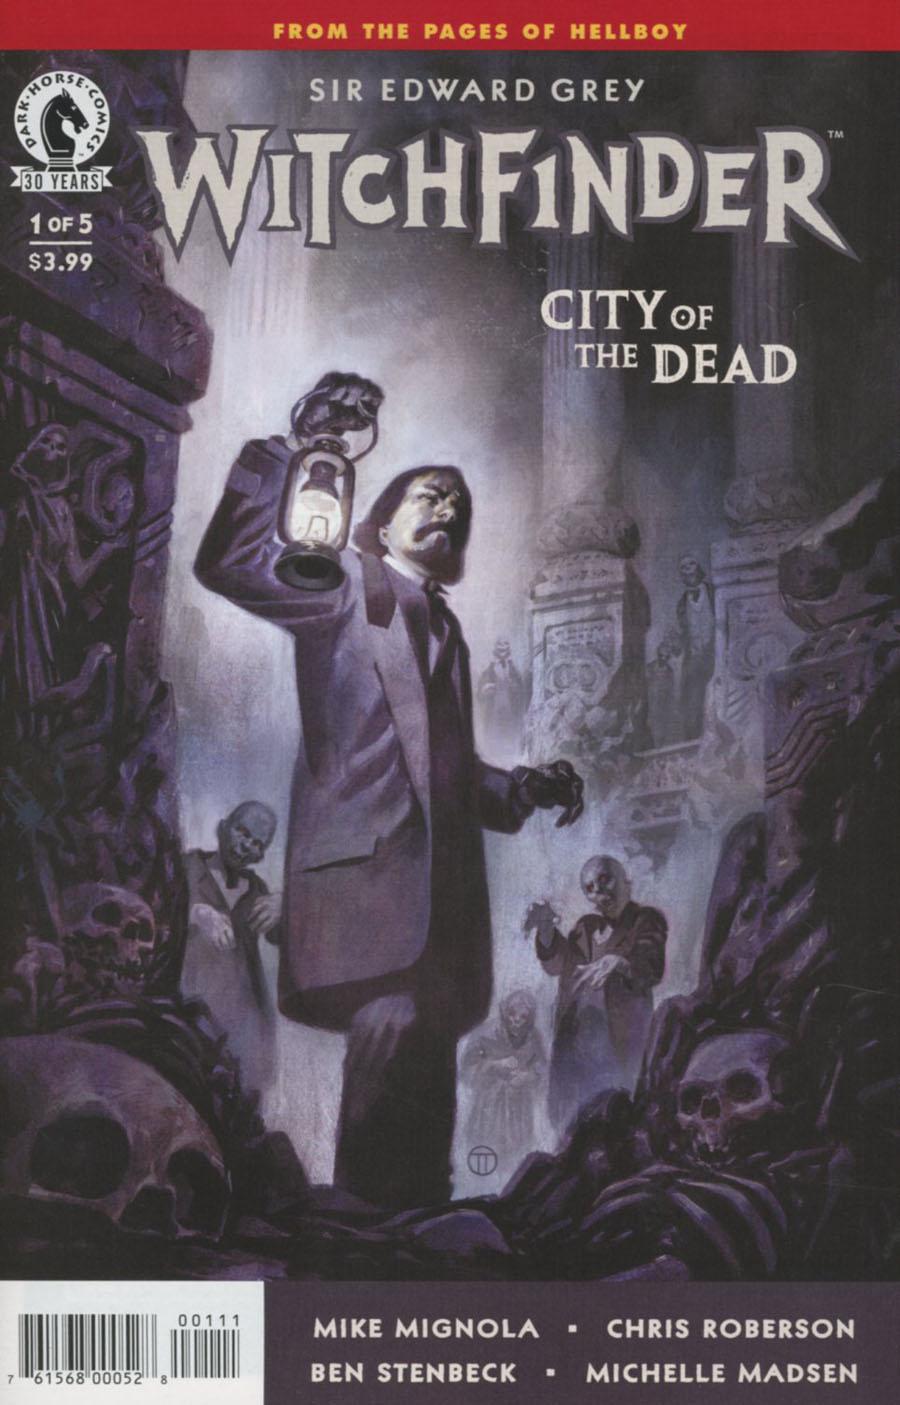 Witchfinder City Of The Dead Vol. 1 #1